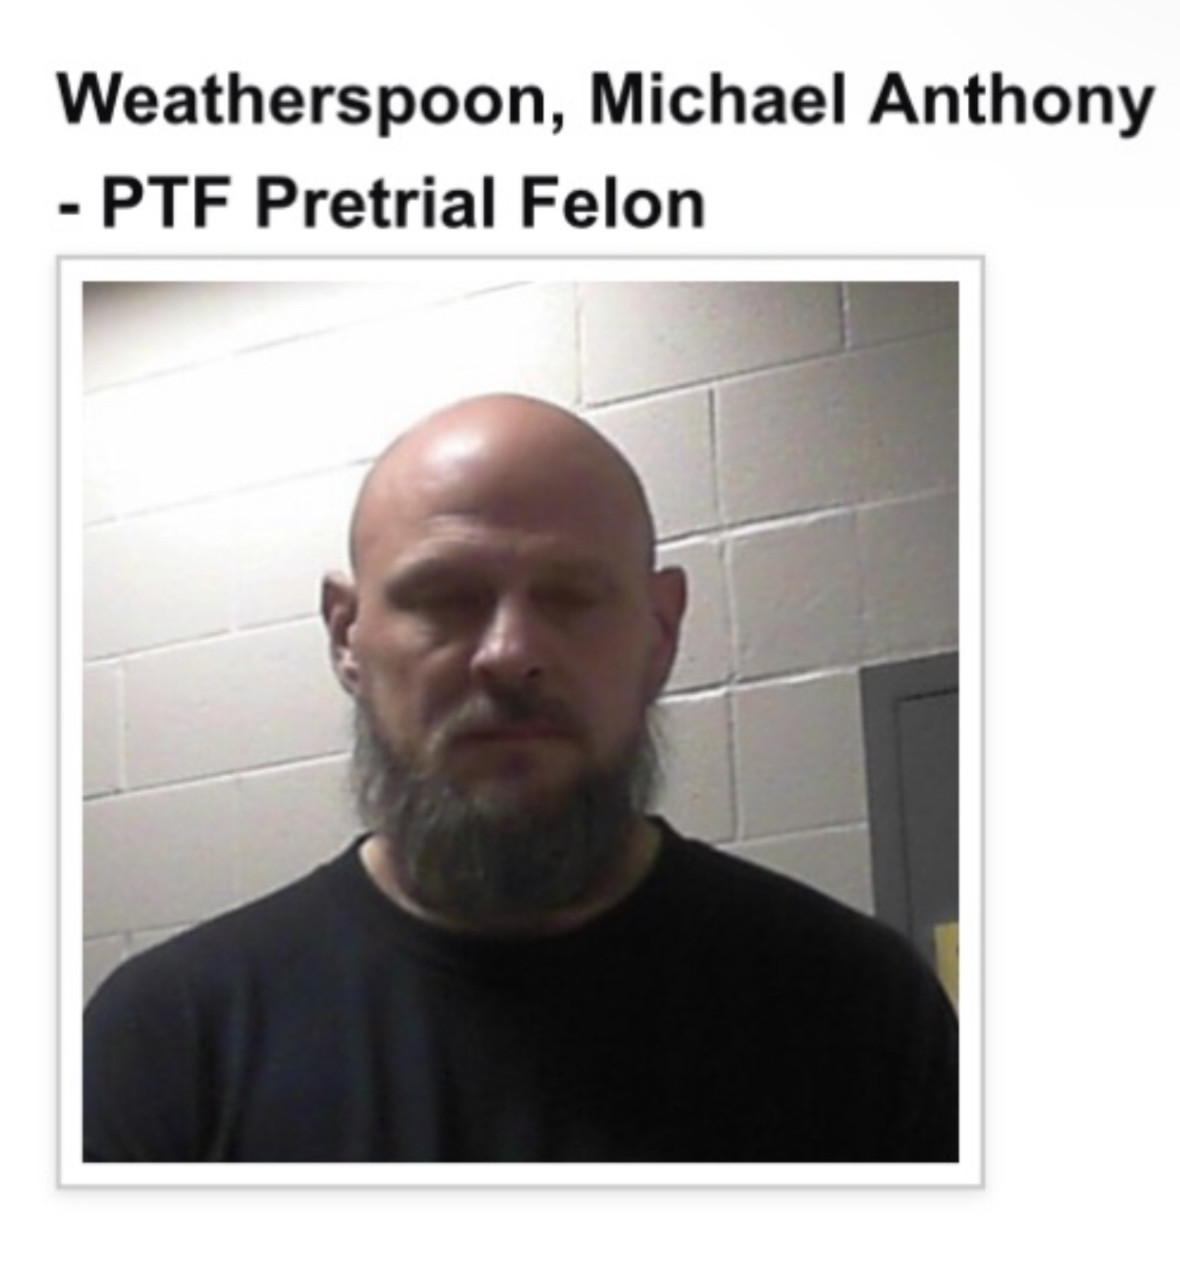 Michael Anthony Weatherspoon has been arrested in Harts, WV after being on the run for 7 months.